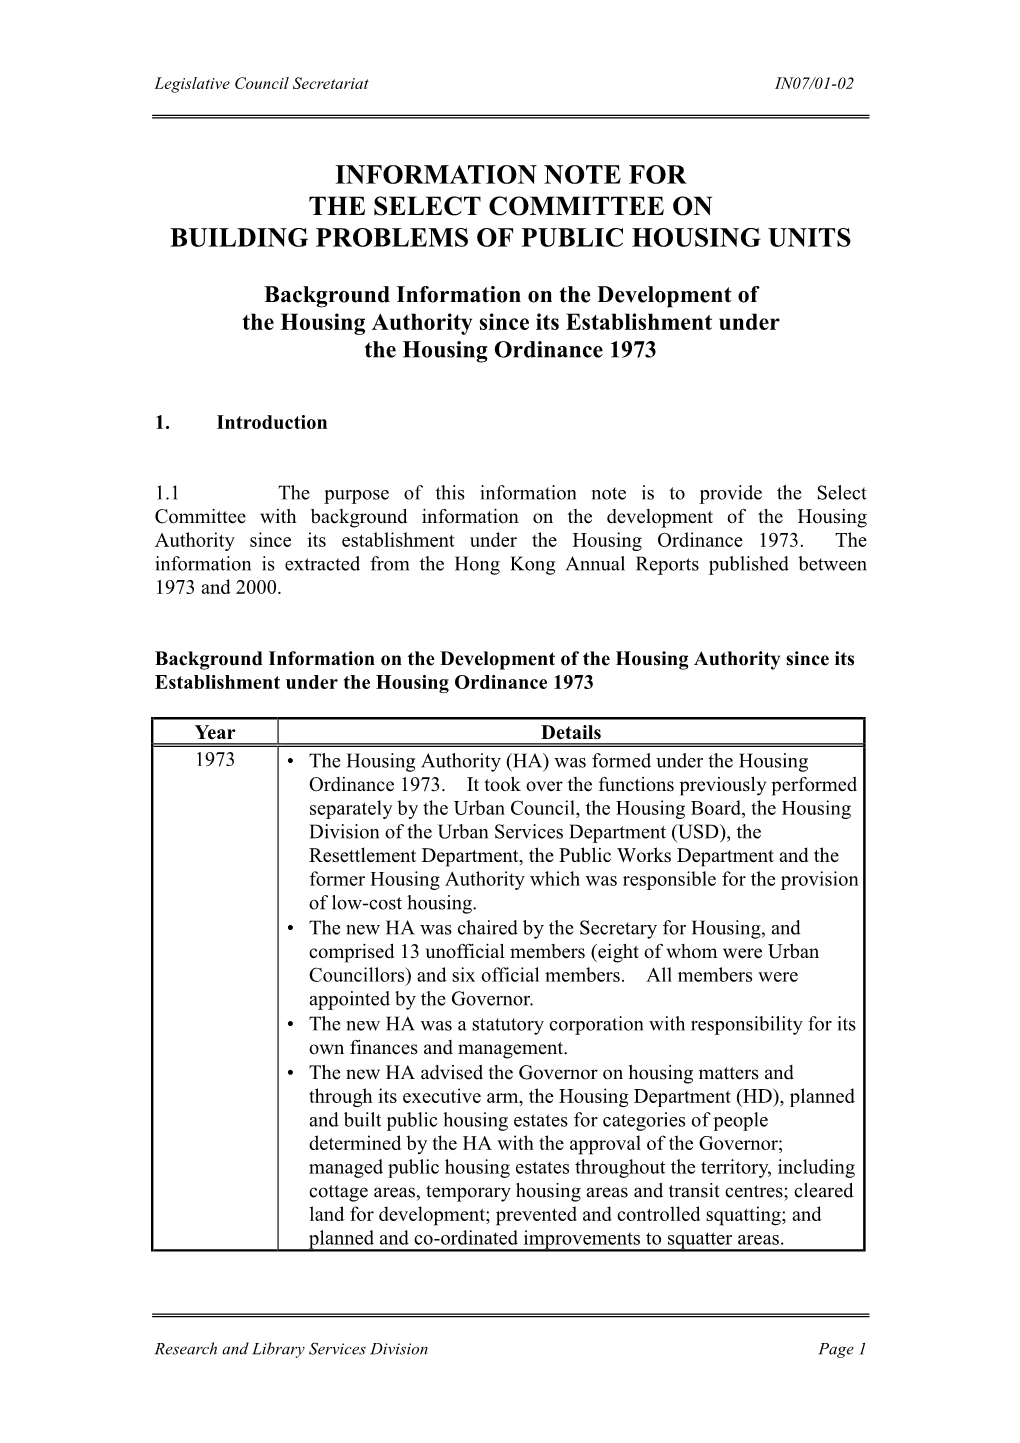 Information Note for the Select Committee on Building Problems of Public Housing Units